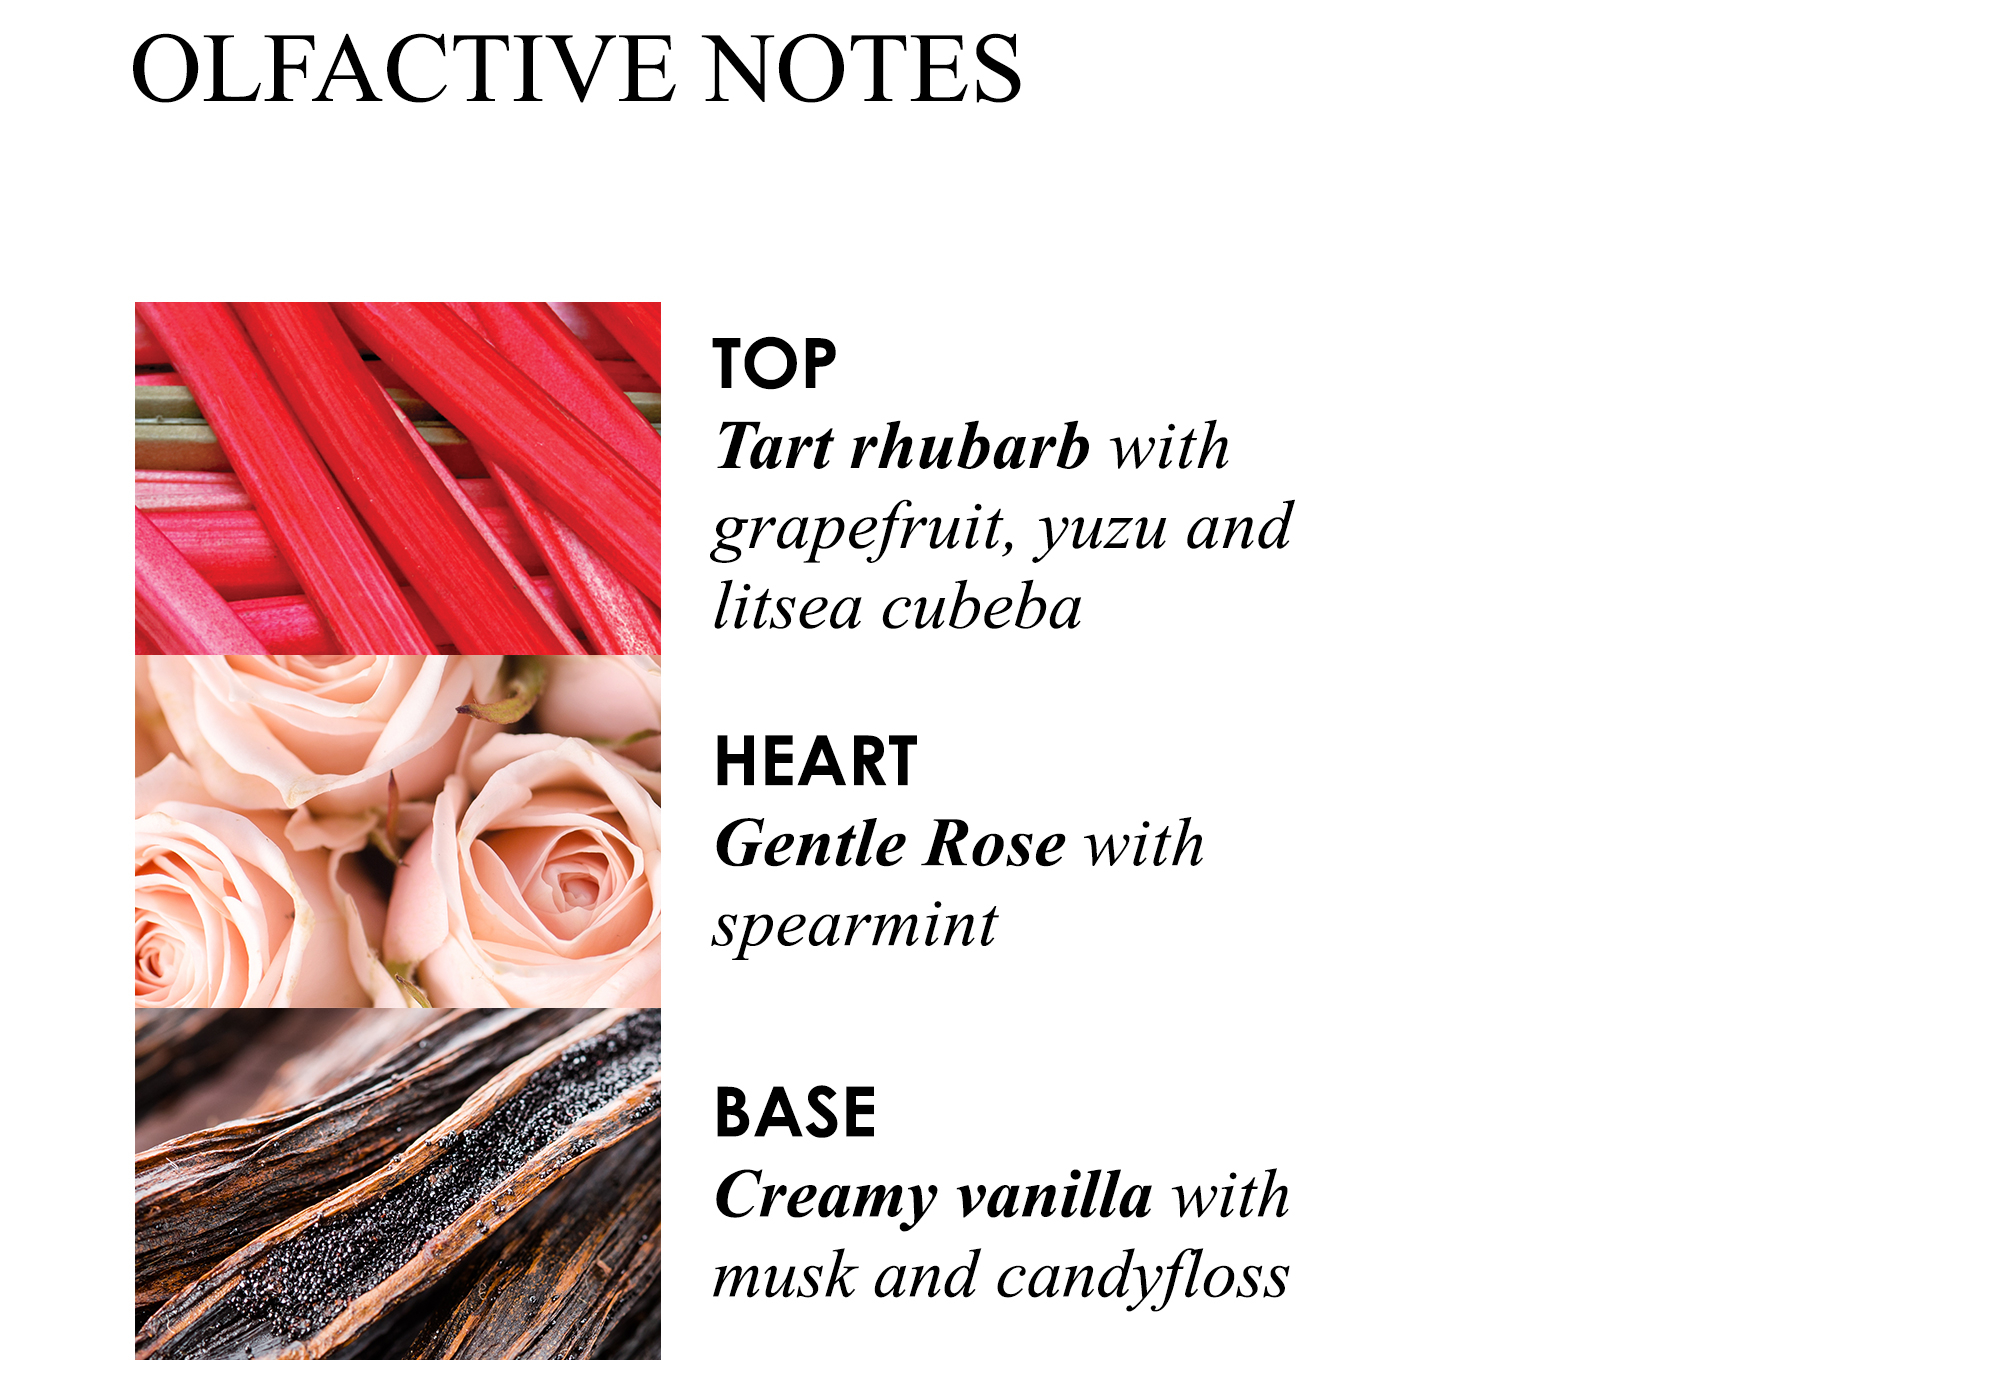 olfactive notes. top tart rhubarb with grapefruit, yuzu and litsea cubeba. Heart gentle rose with spearmint. Base creamy vanilla with musk and candyfloss